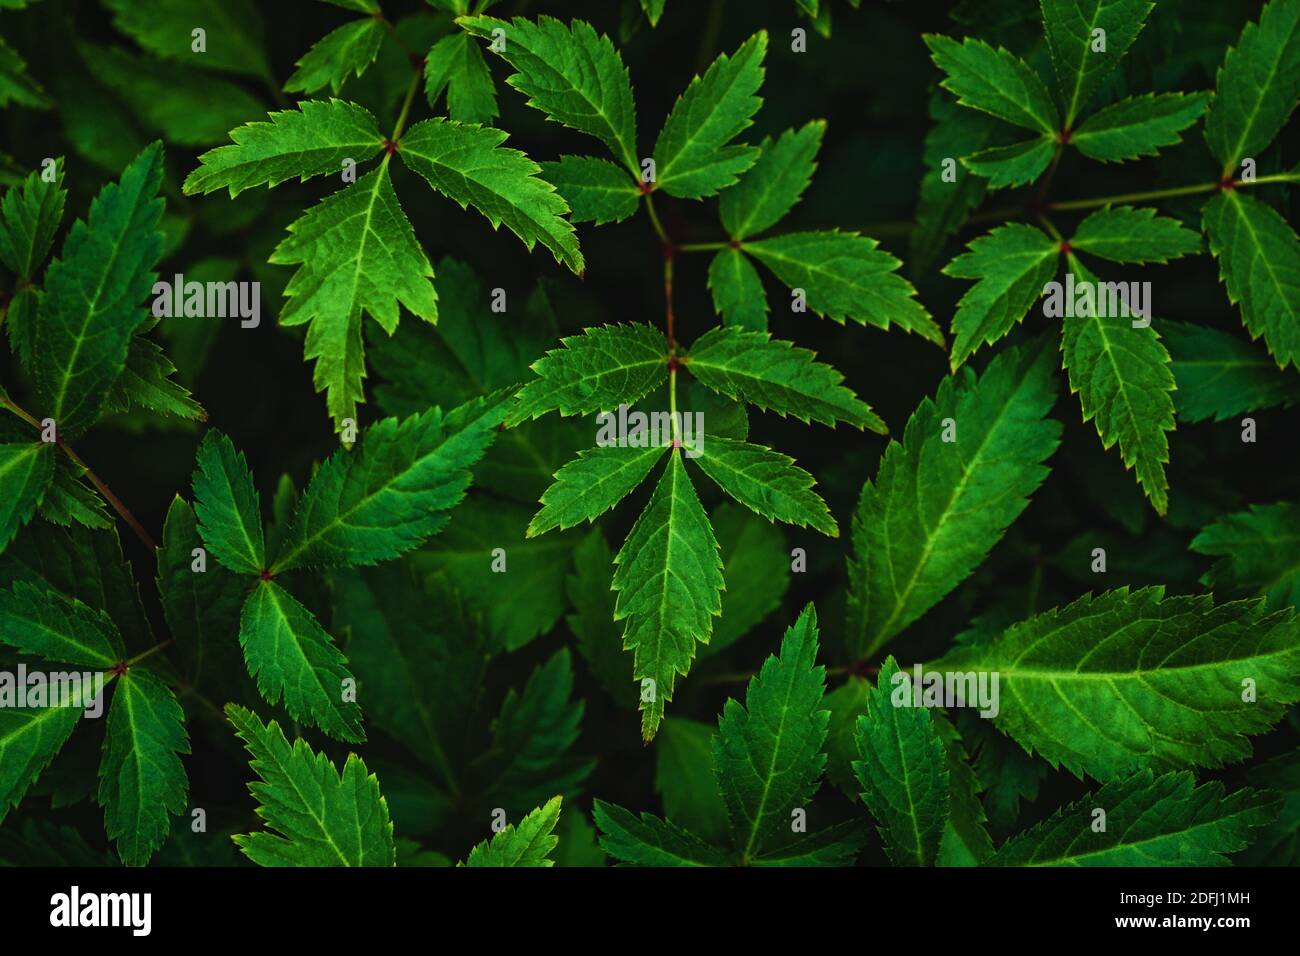 Dark green leaves of Japanese astilbe (Astilbe japonica) at night, view from above Stock Photo